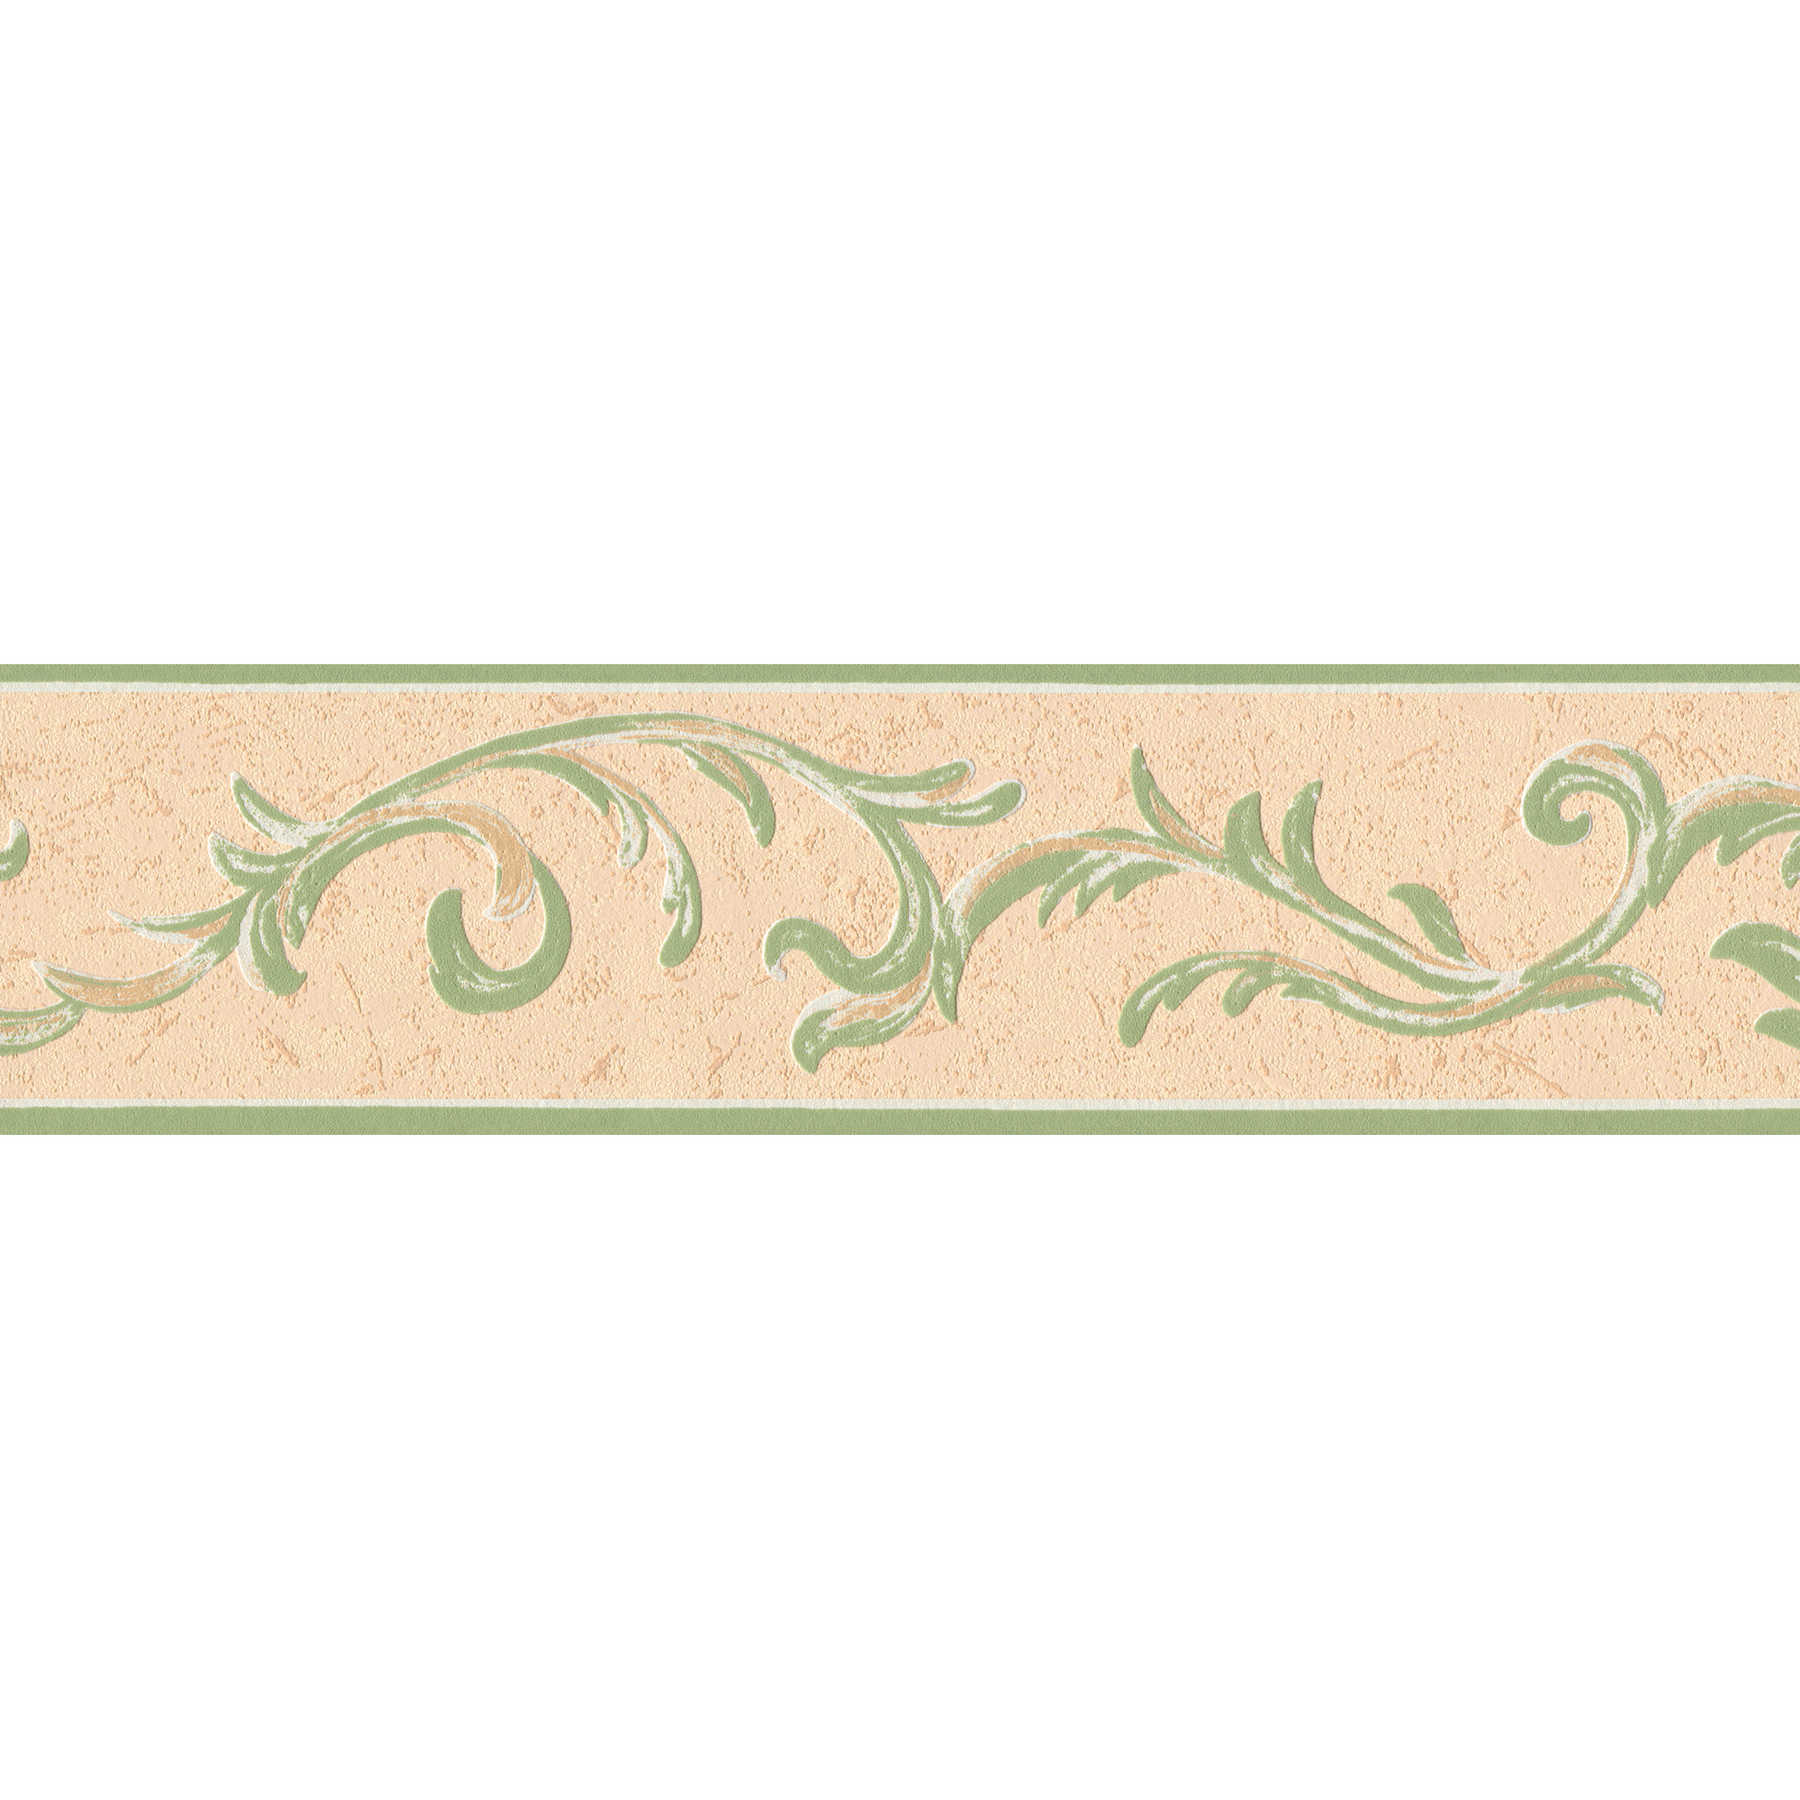         Wallpaper border with floral ornament & plaster look - beige, green
    